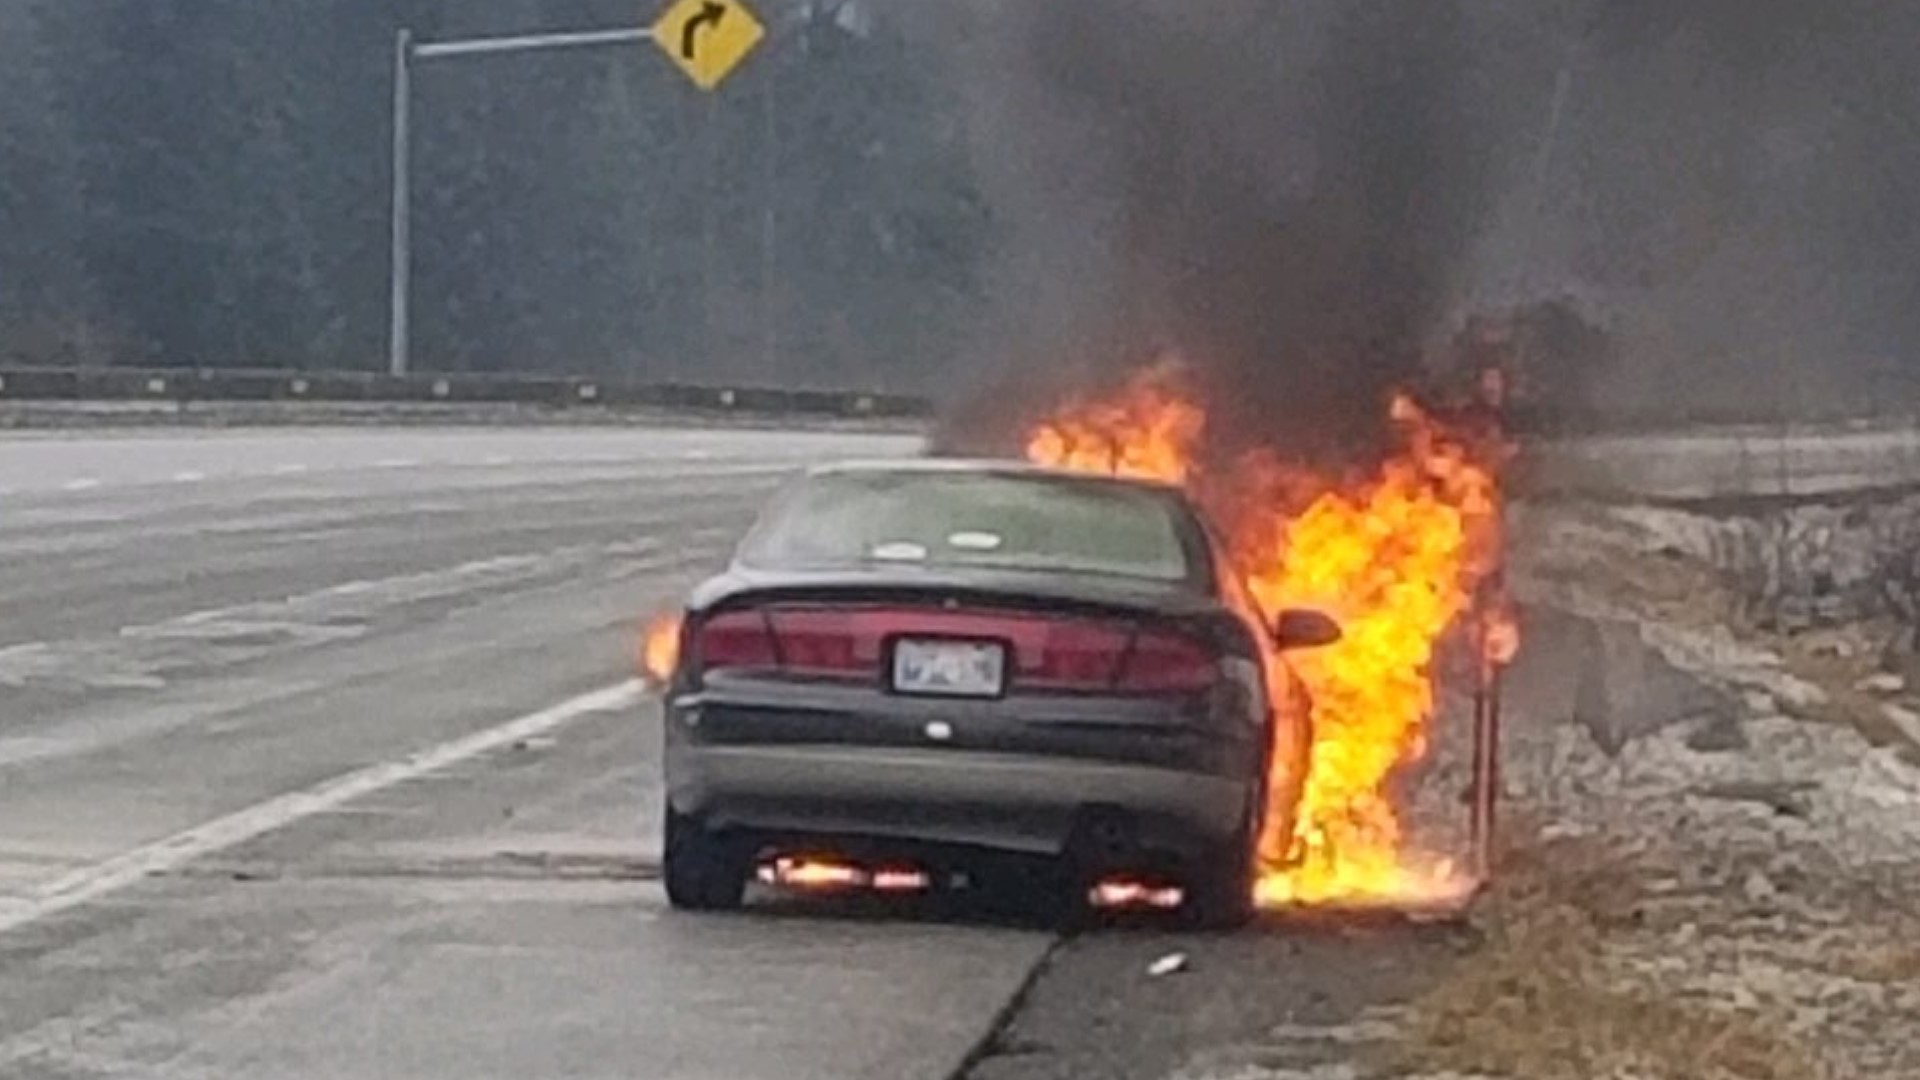 Clallum County Correction Deputies Steve Brooks and Tyler Cortani were able to save an Oklahoma woman’s dog after her car erupted in flames on Thursday.